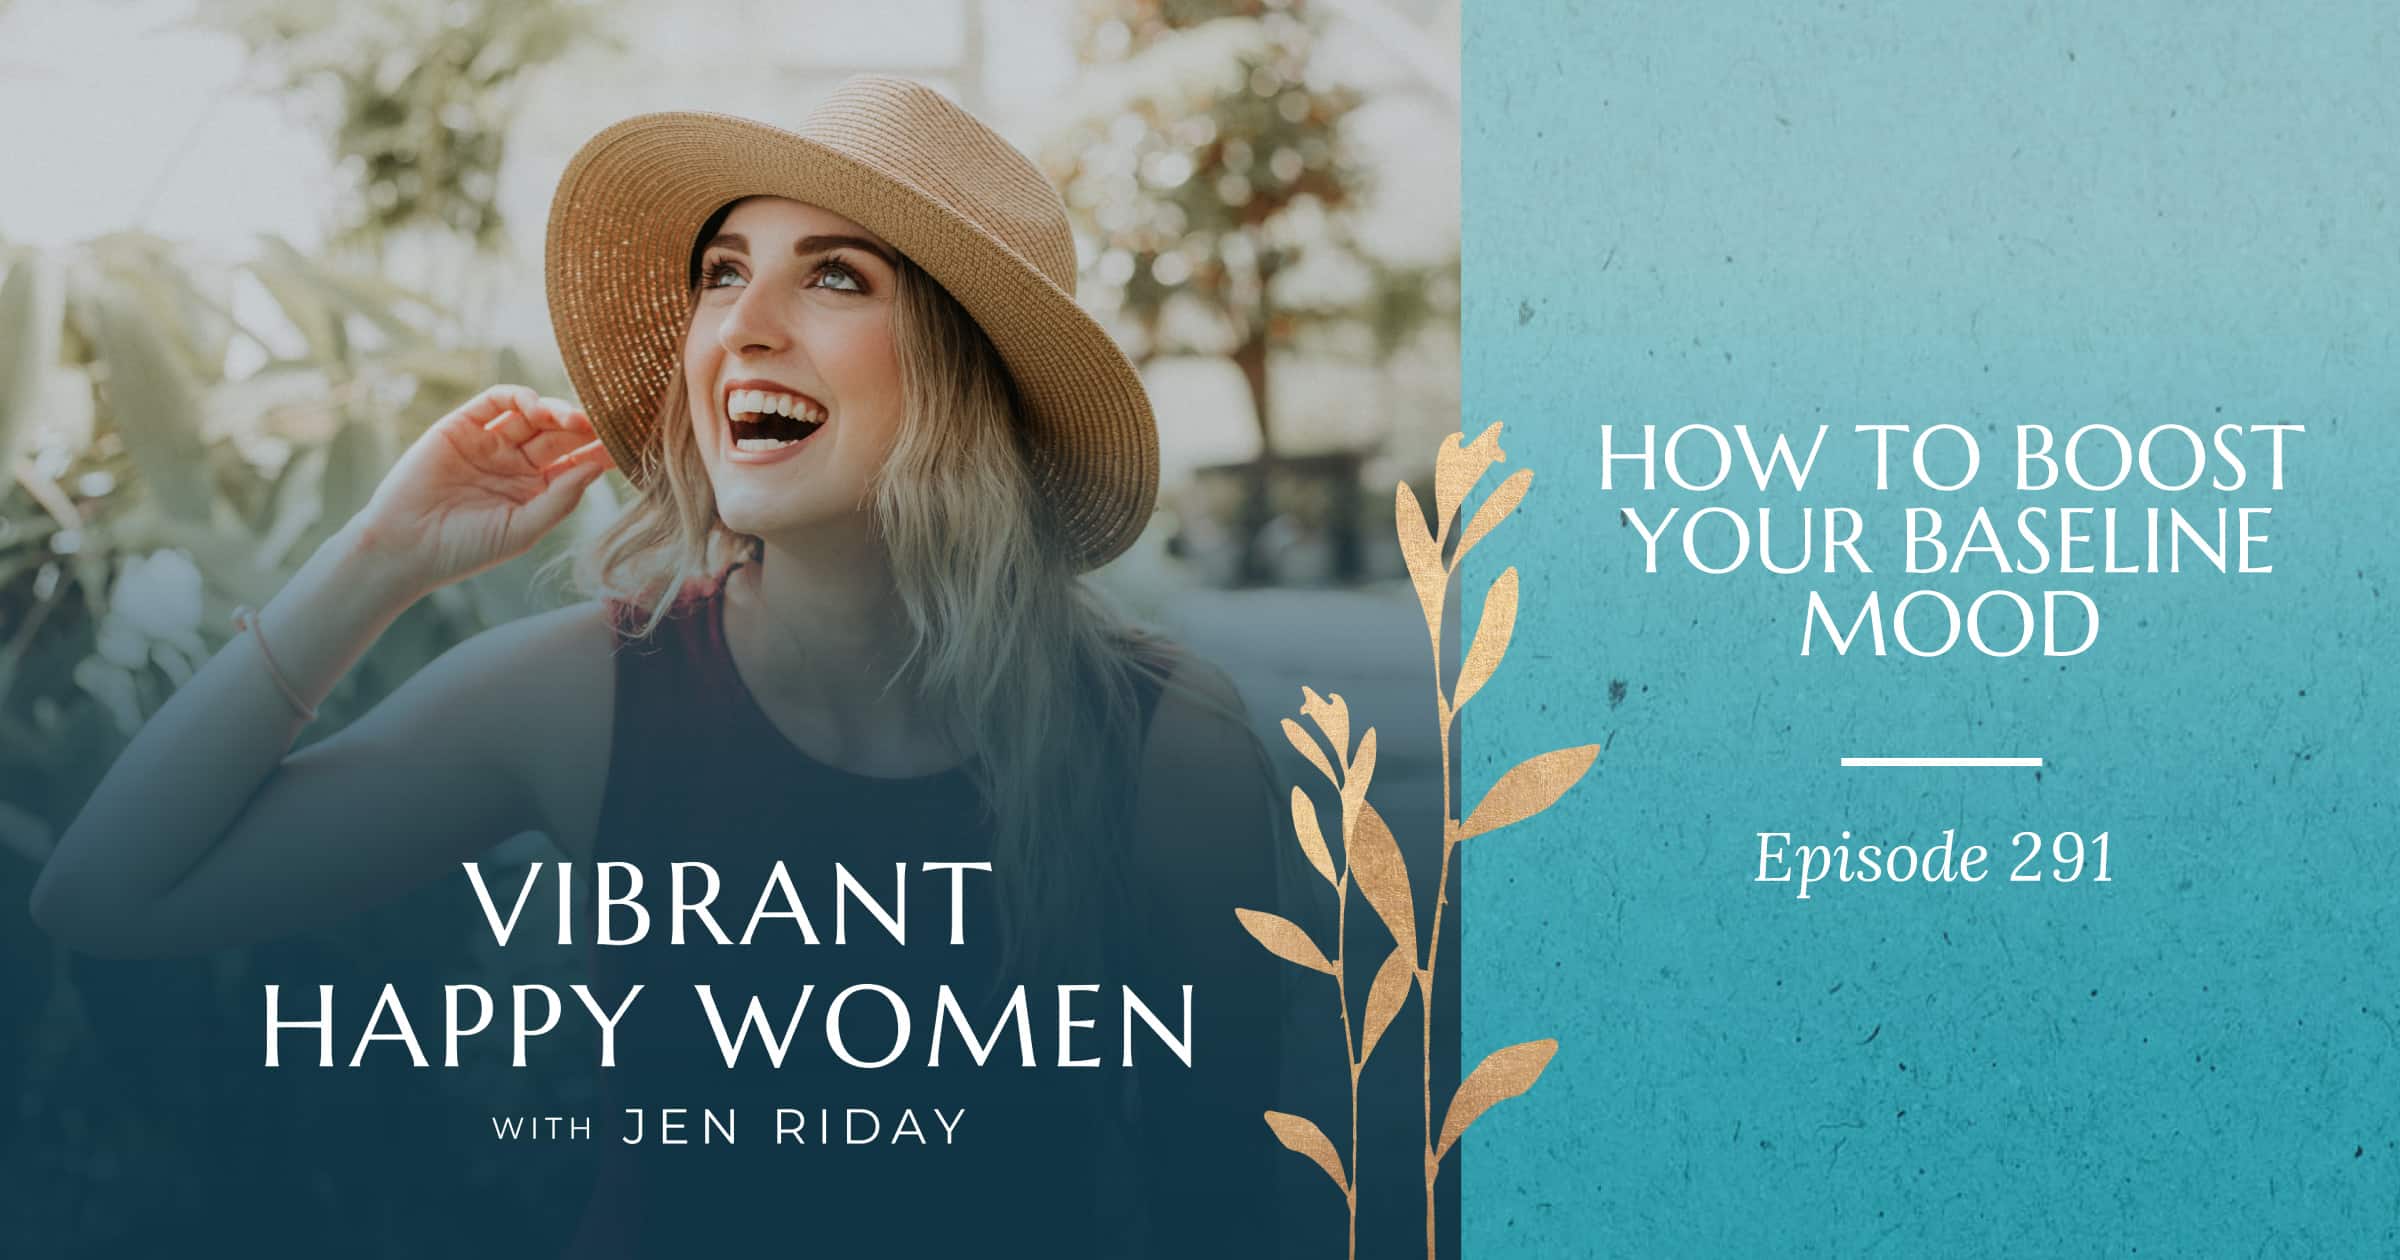 Vibrant Happy Women with Dr. Jen Riday | How to Boost Your Baseline Mood